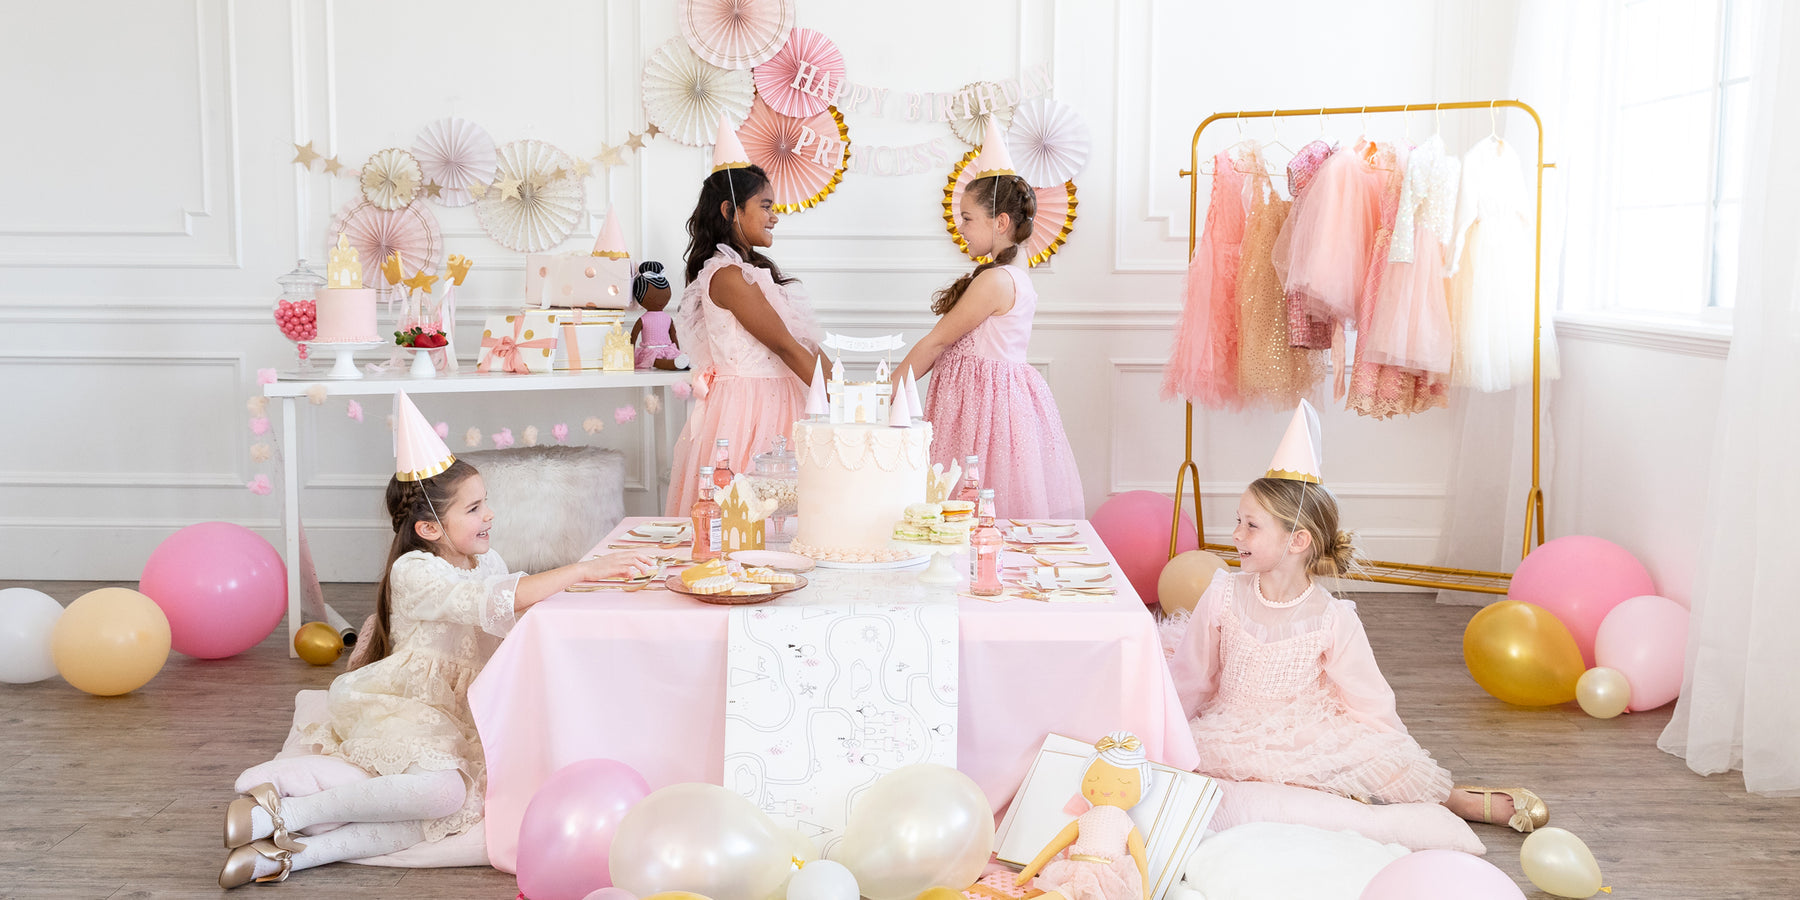 We have a collection of carefully curated princess party decor items, princess tableware, and princess gift bags.